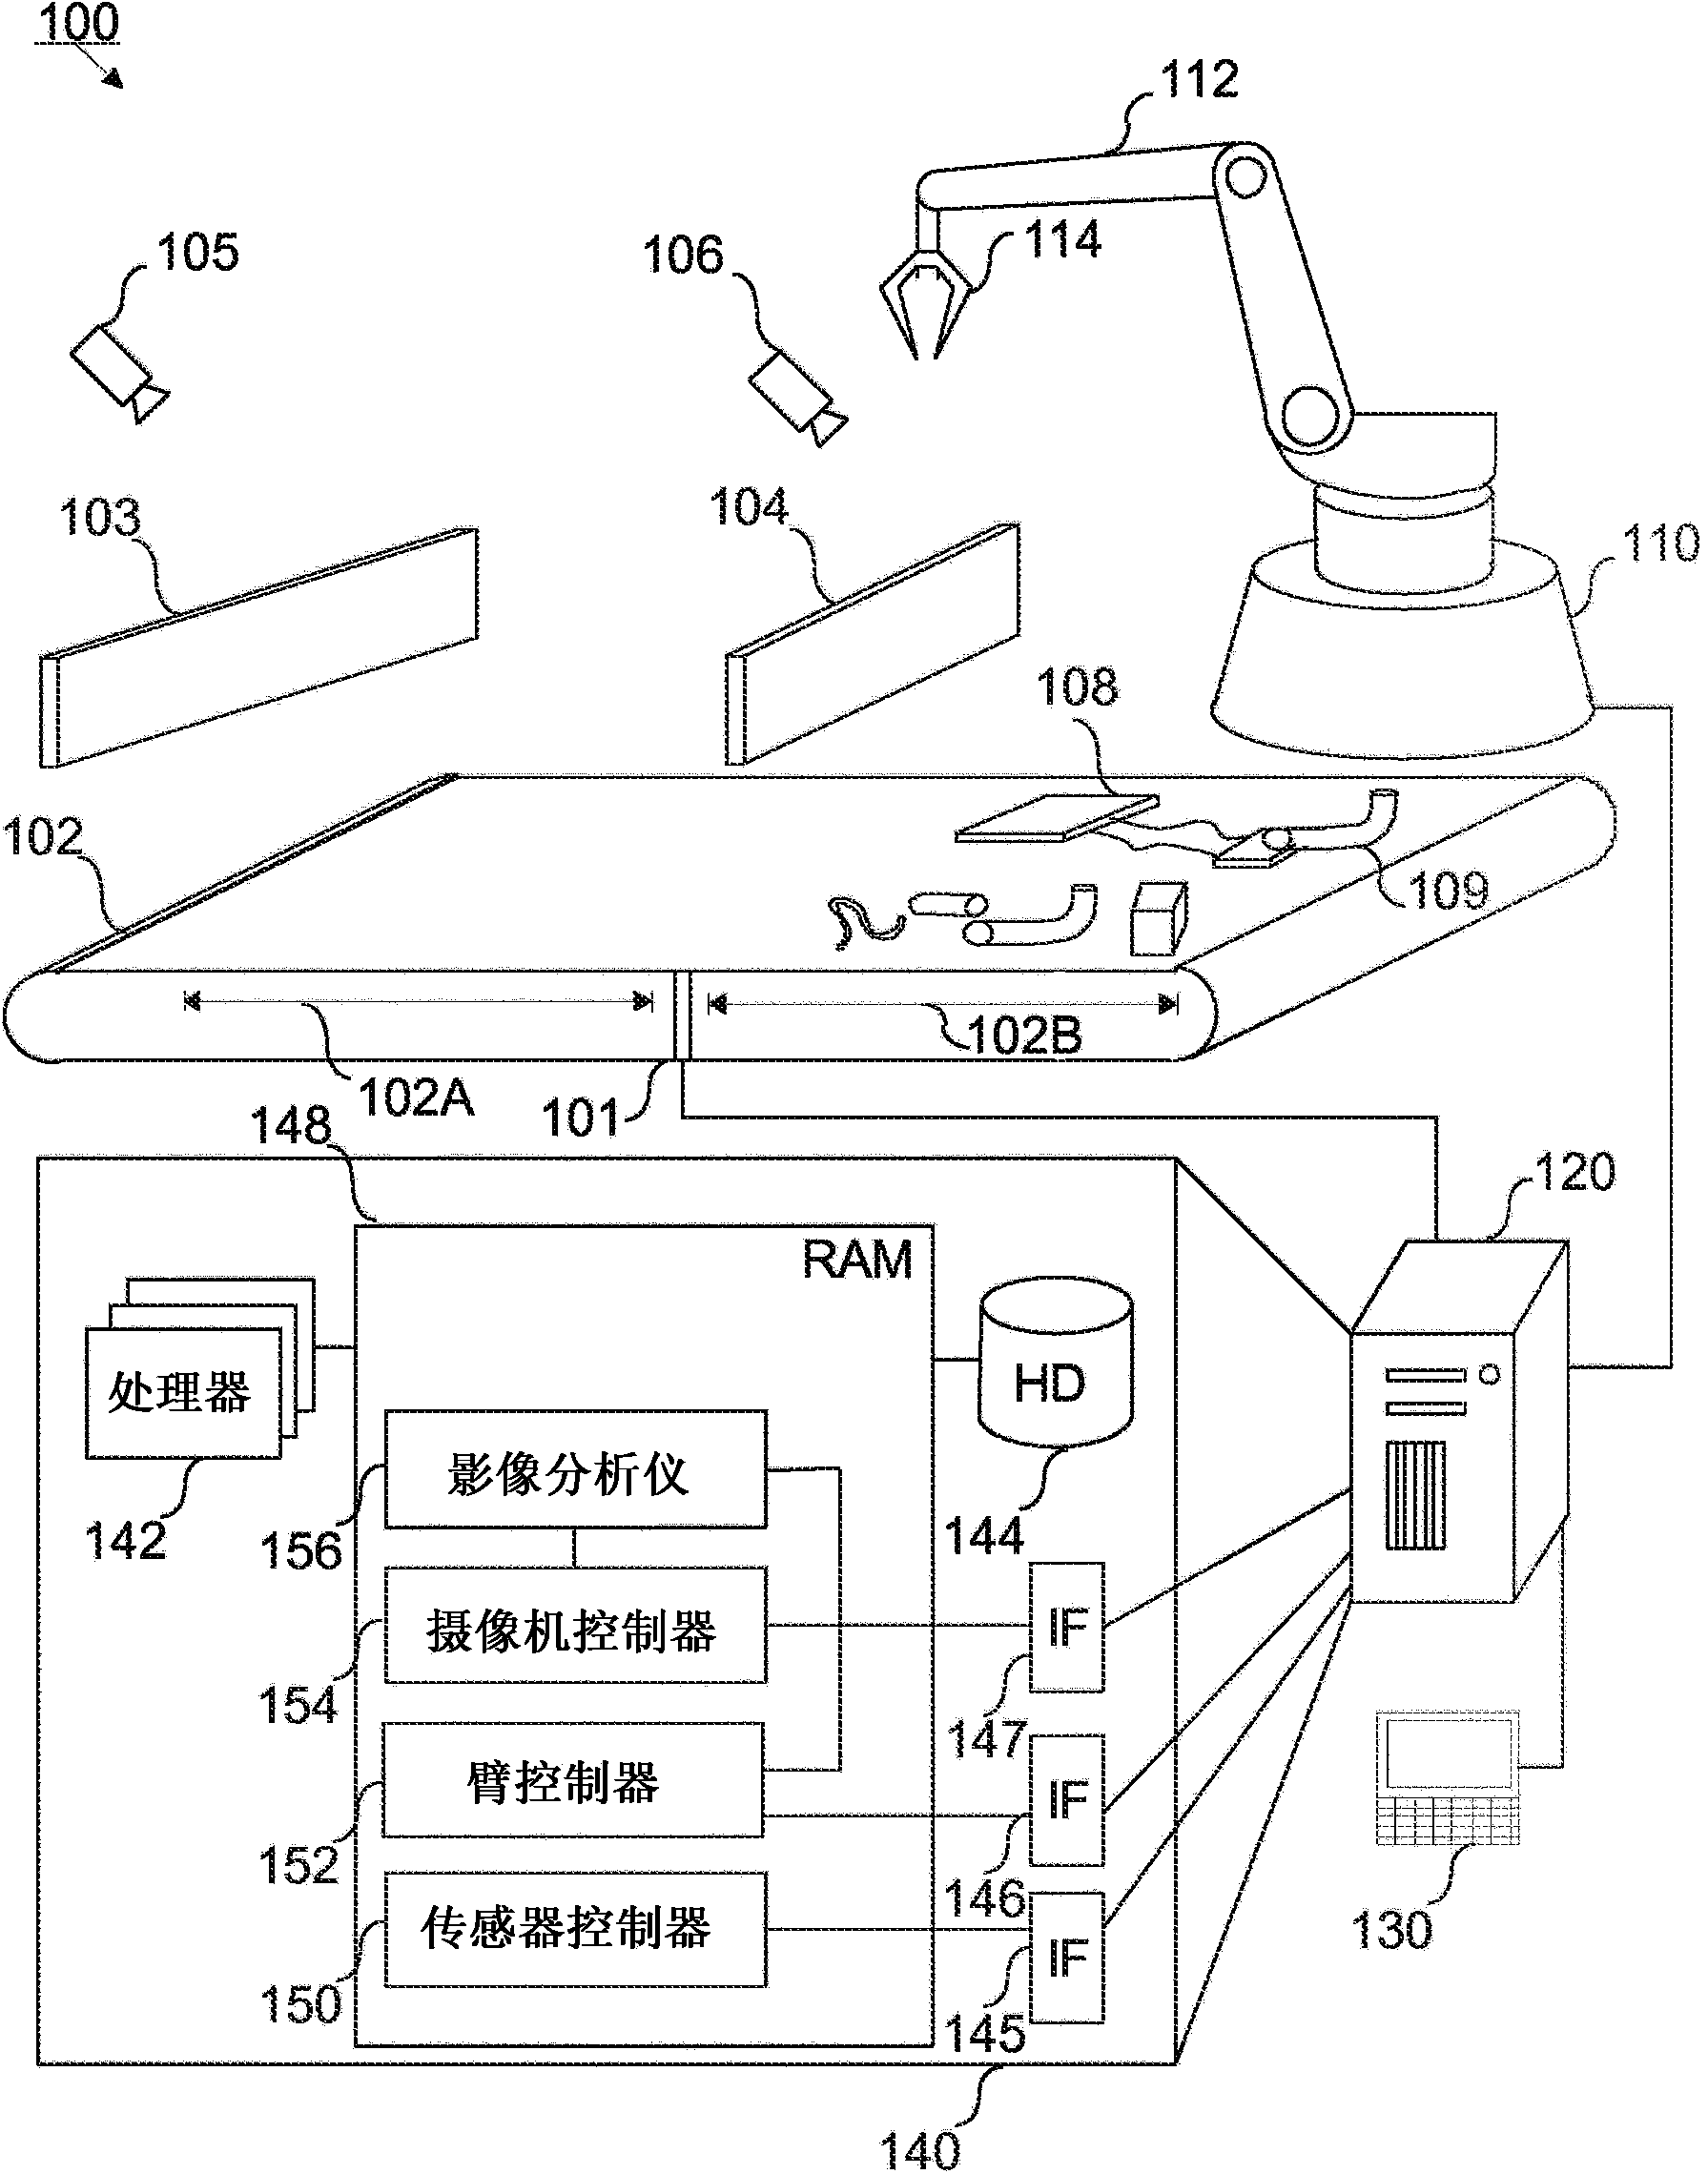 Method for invalidating sensor measurements after a picking action in a robot system